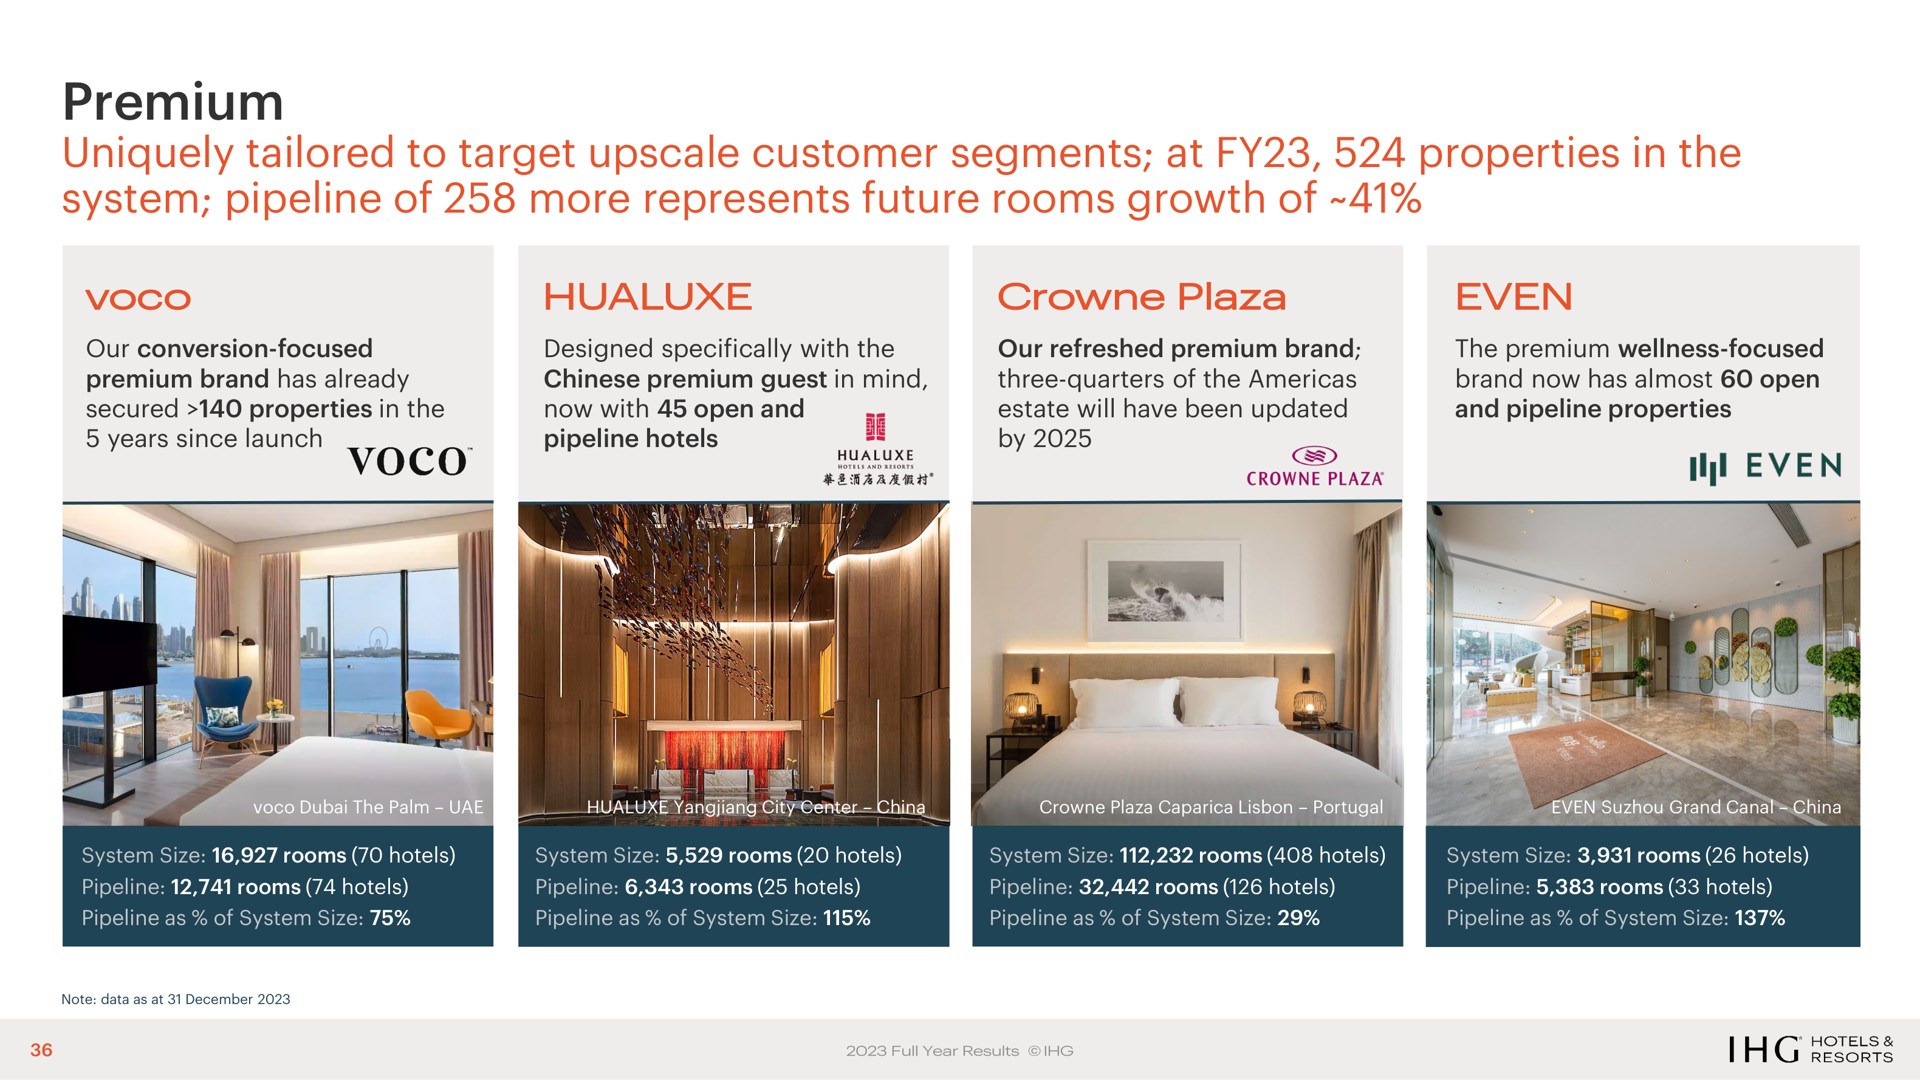 premium uniquely tailored to target upscale customer segments at properties in the system pipeline of more represents future rooms growth of | IHG Hotels